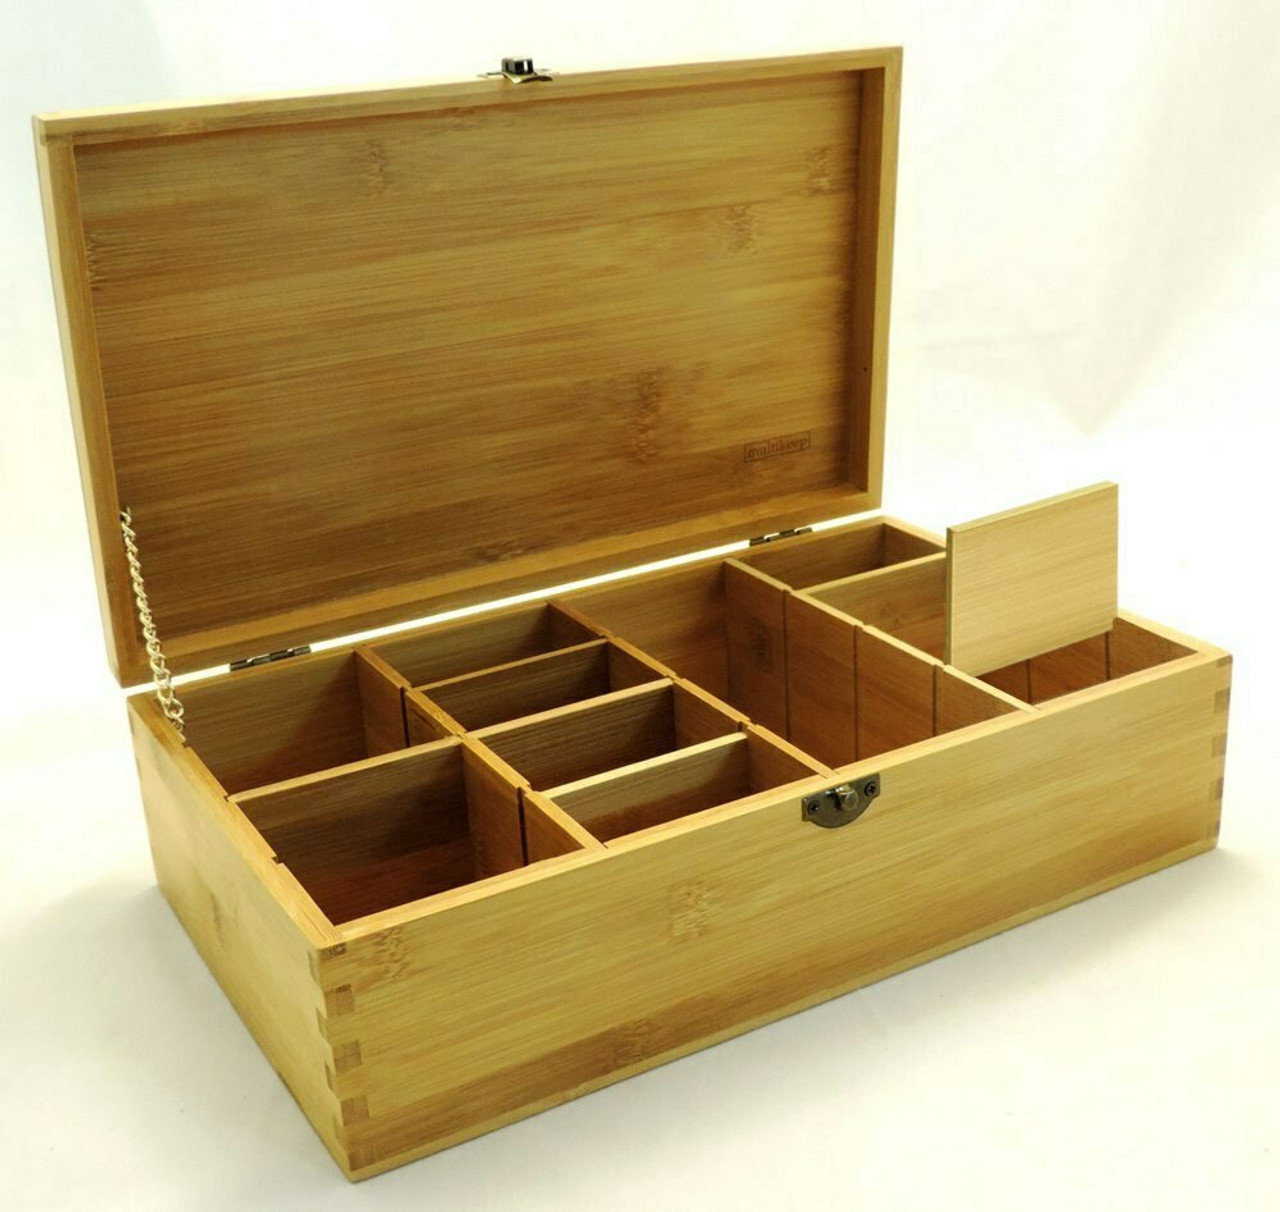 Wooden Photobox with Removable Lid - 4x6 Photo Box